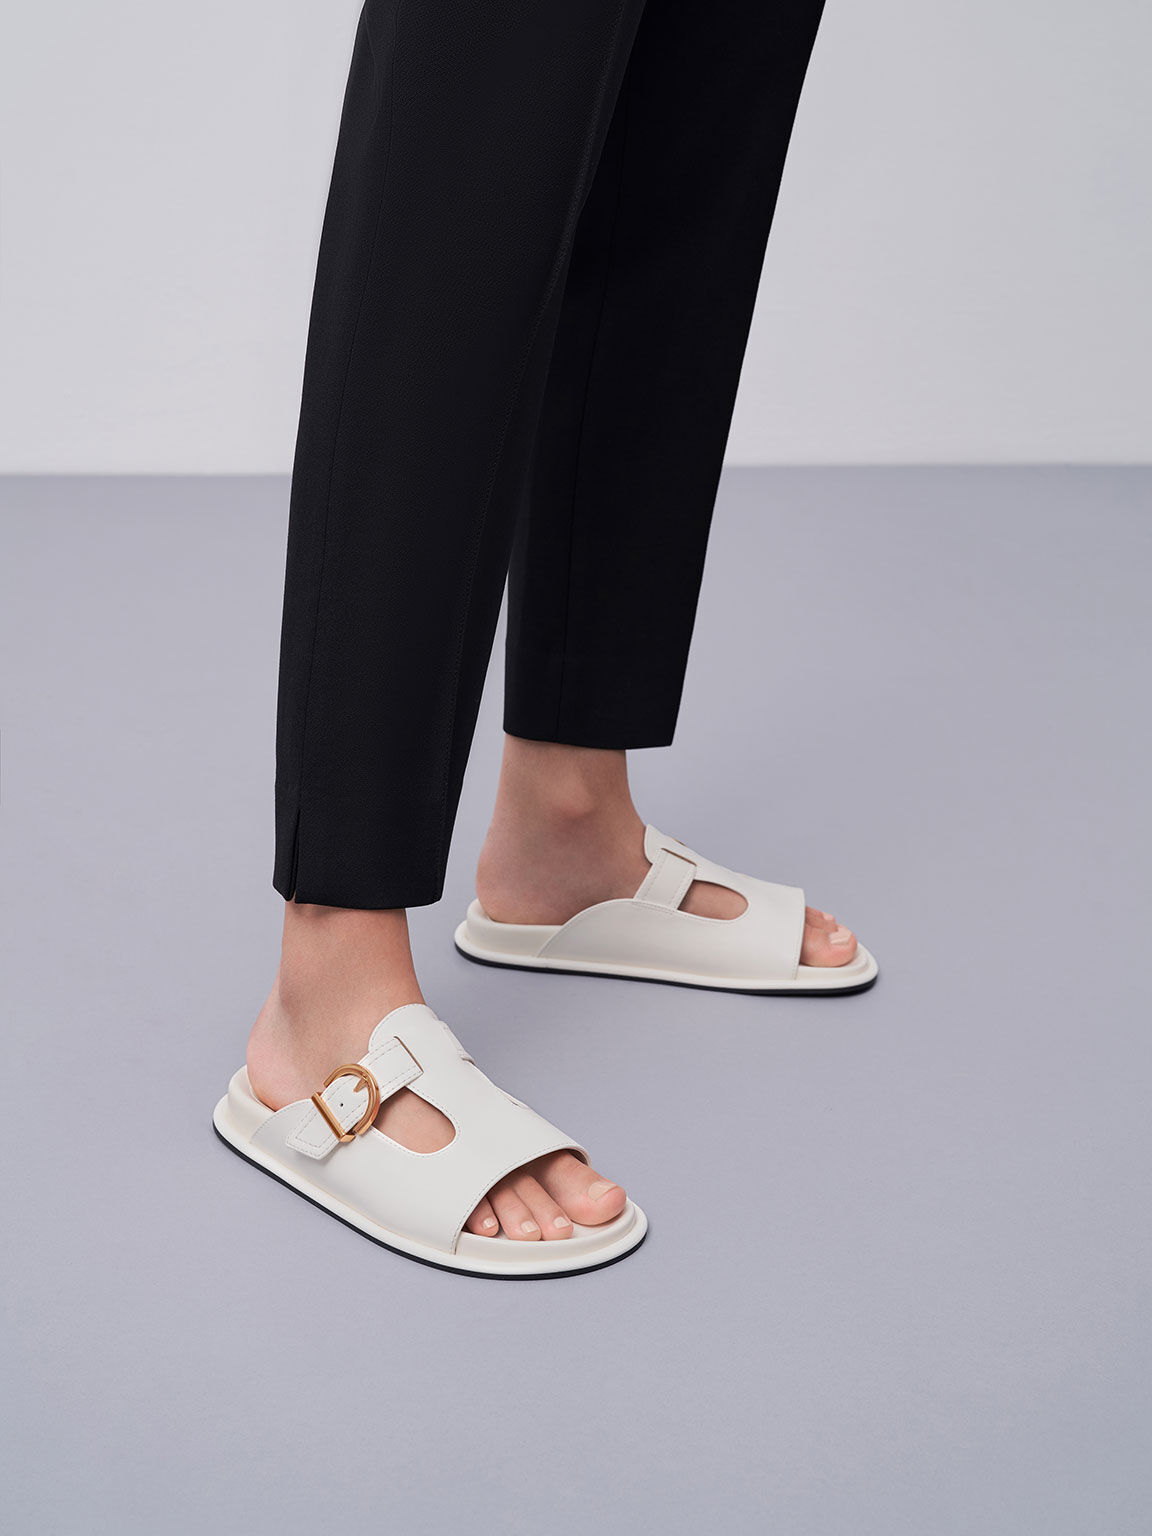 White Cut-Out Buckled Slides - CHARLES & KEITH TH